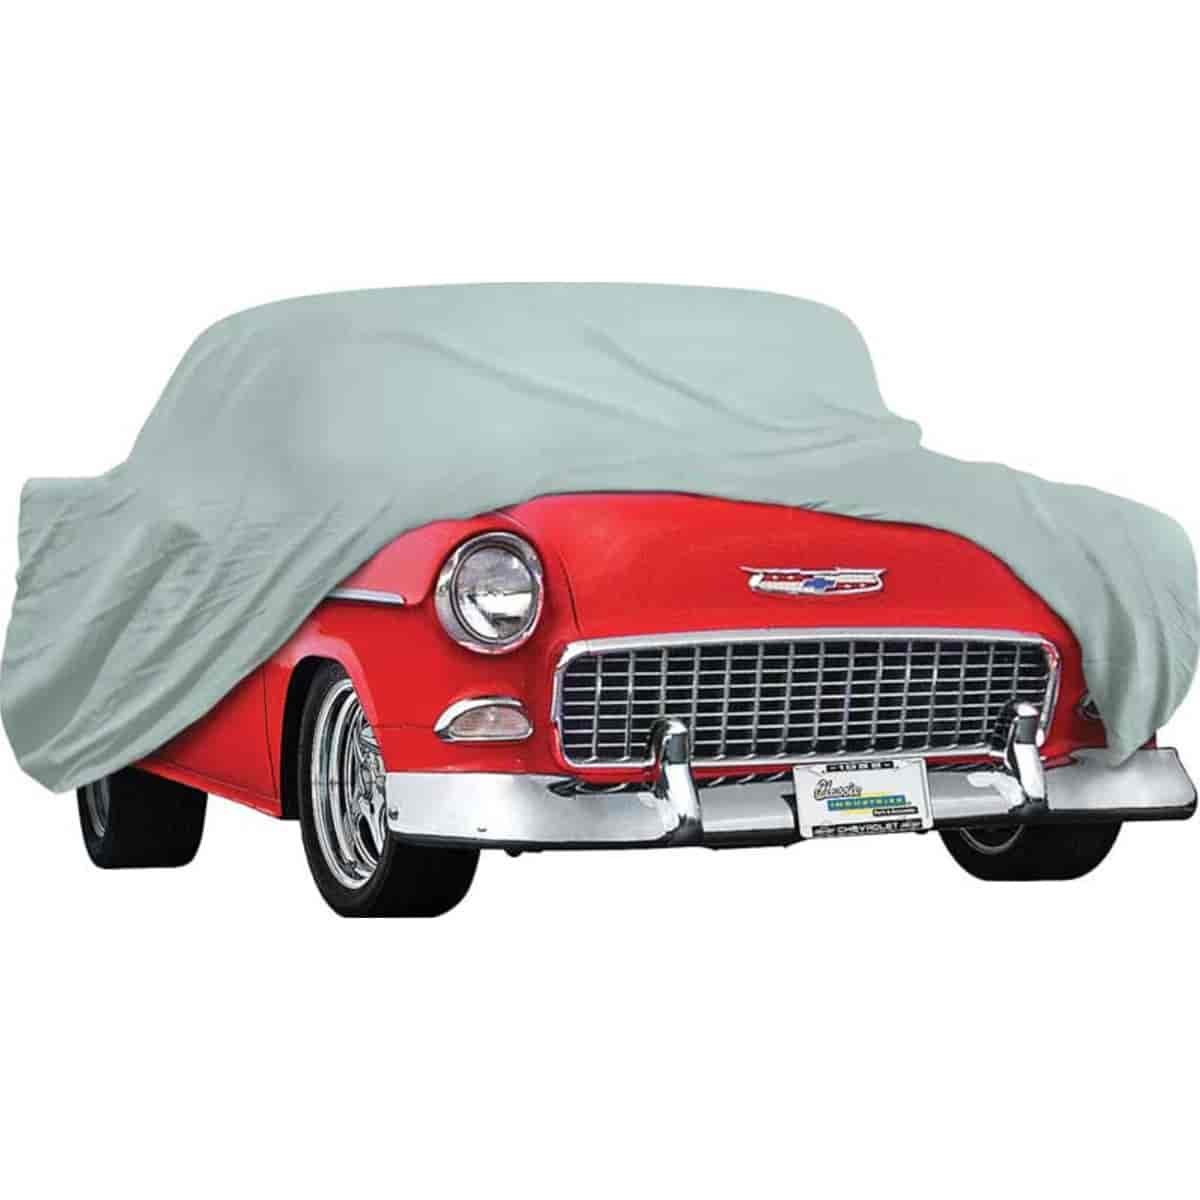 Bel Air/Nomad/One-Fifty Series/Two-Ten Series Diamond Fleece Car Cover